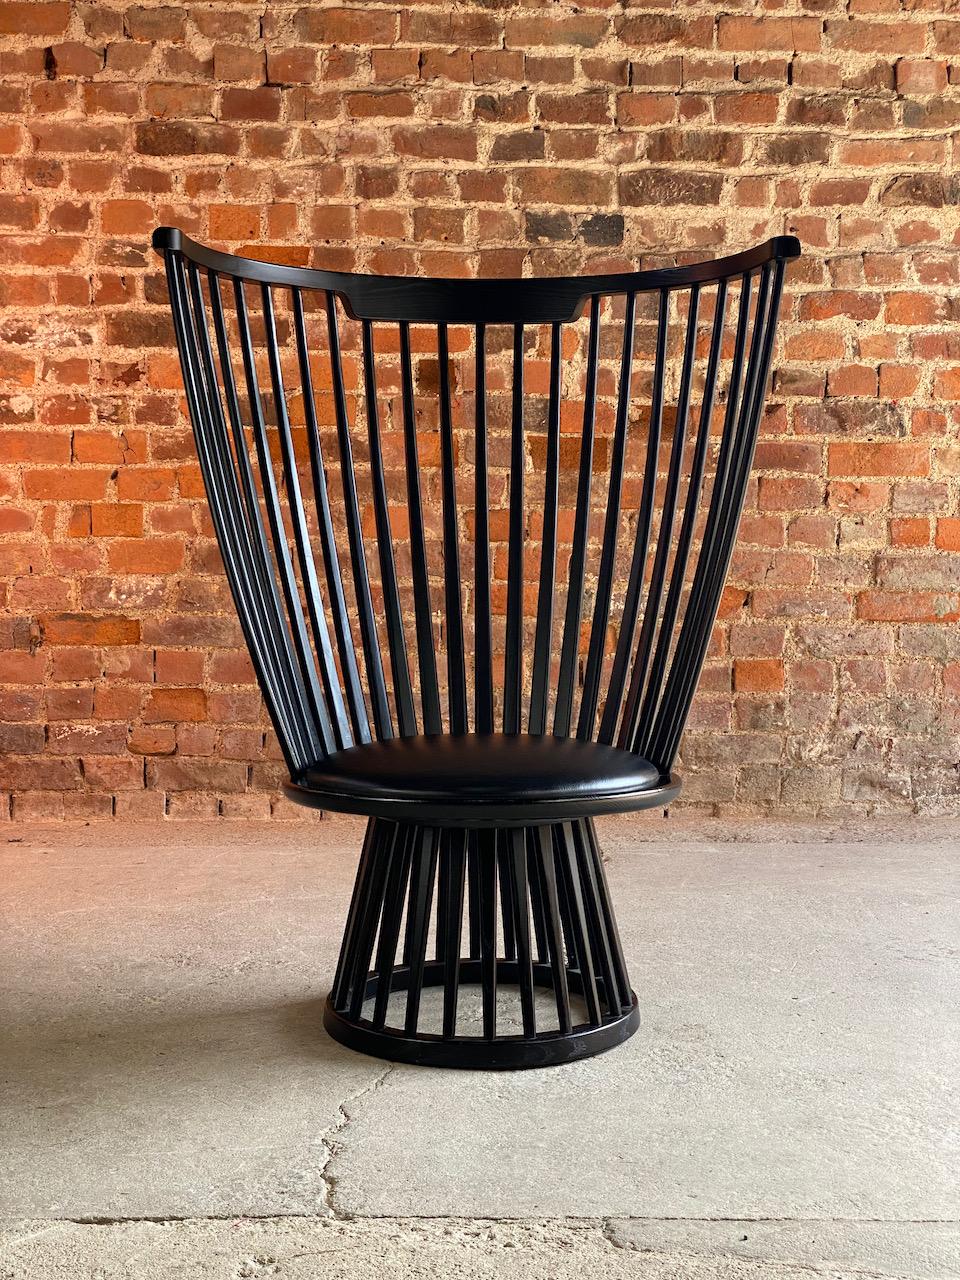 Tom Dixon fan chair in black ash & leather

Fabulous bold and striking Tom Dixon Fan chair in black on black, a true statement piece, a dramatic and sculptural take on the Classic British design of the ‘Windsor Chair’, with its semi-transparent